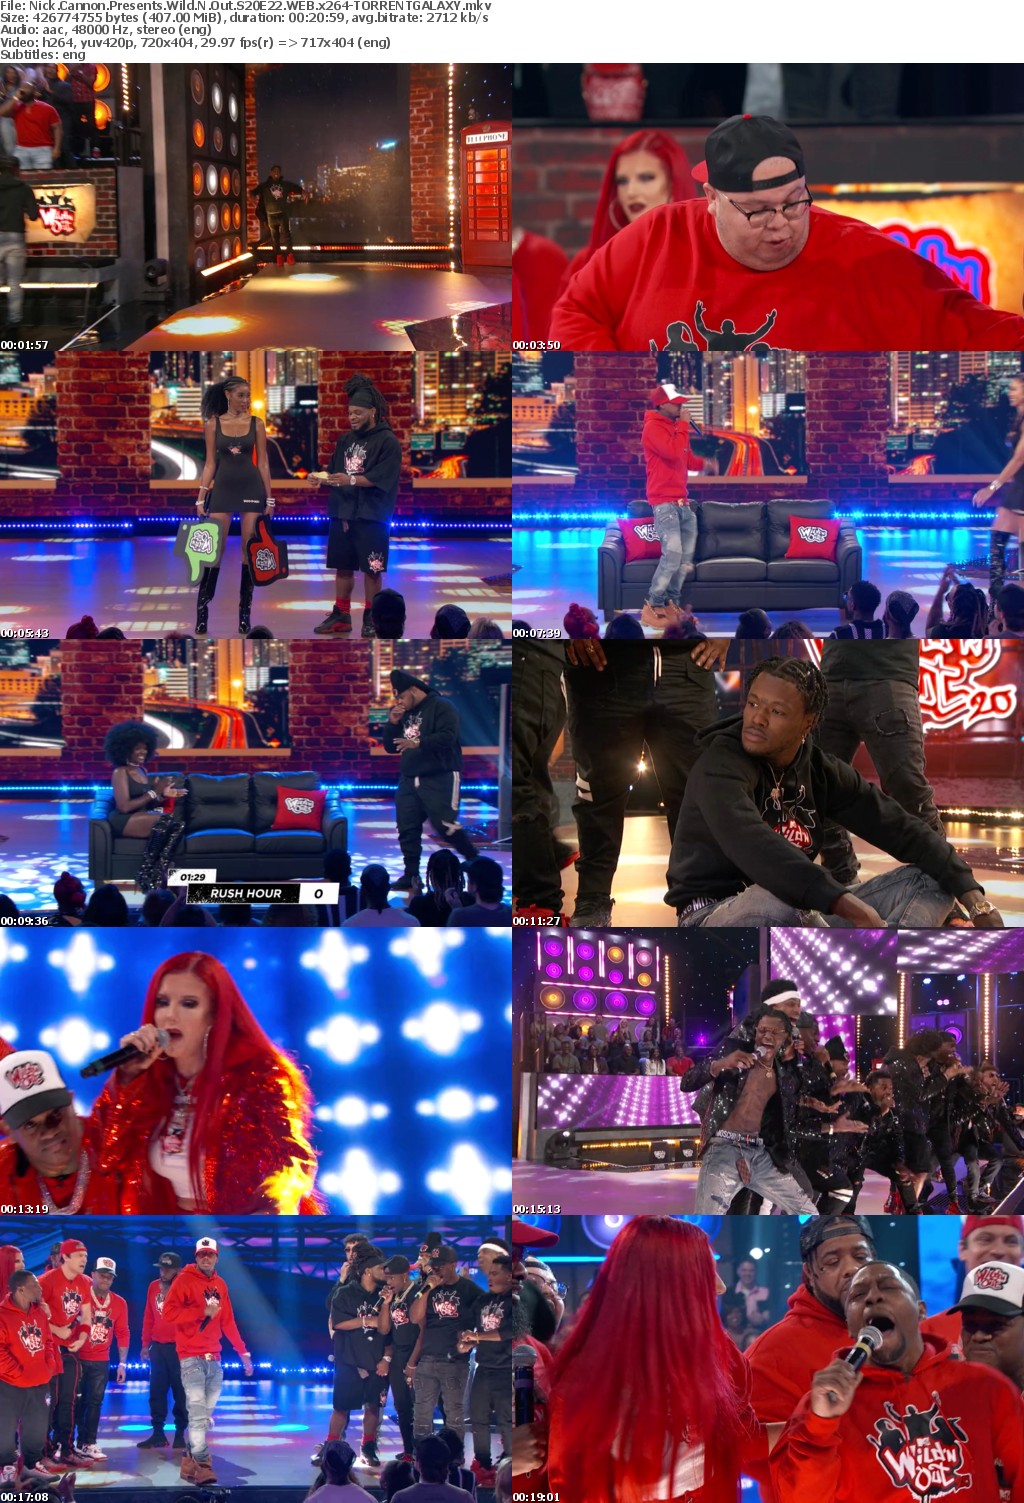 Nick Cannon Presents Wild N Out S20E22 WEB x264-GALAXY